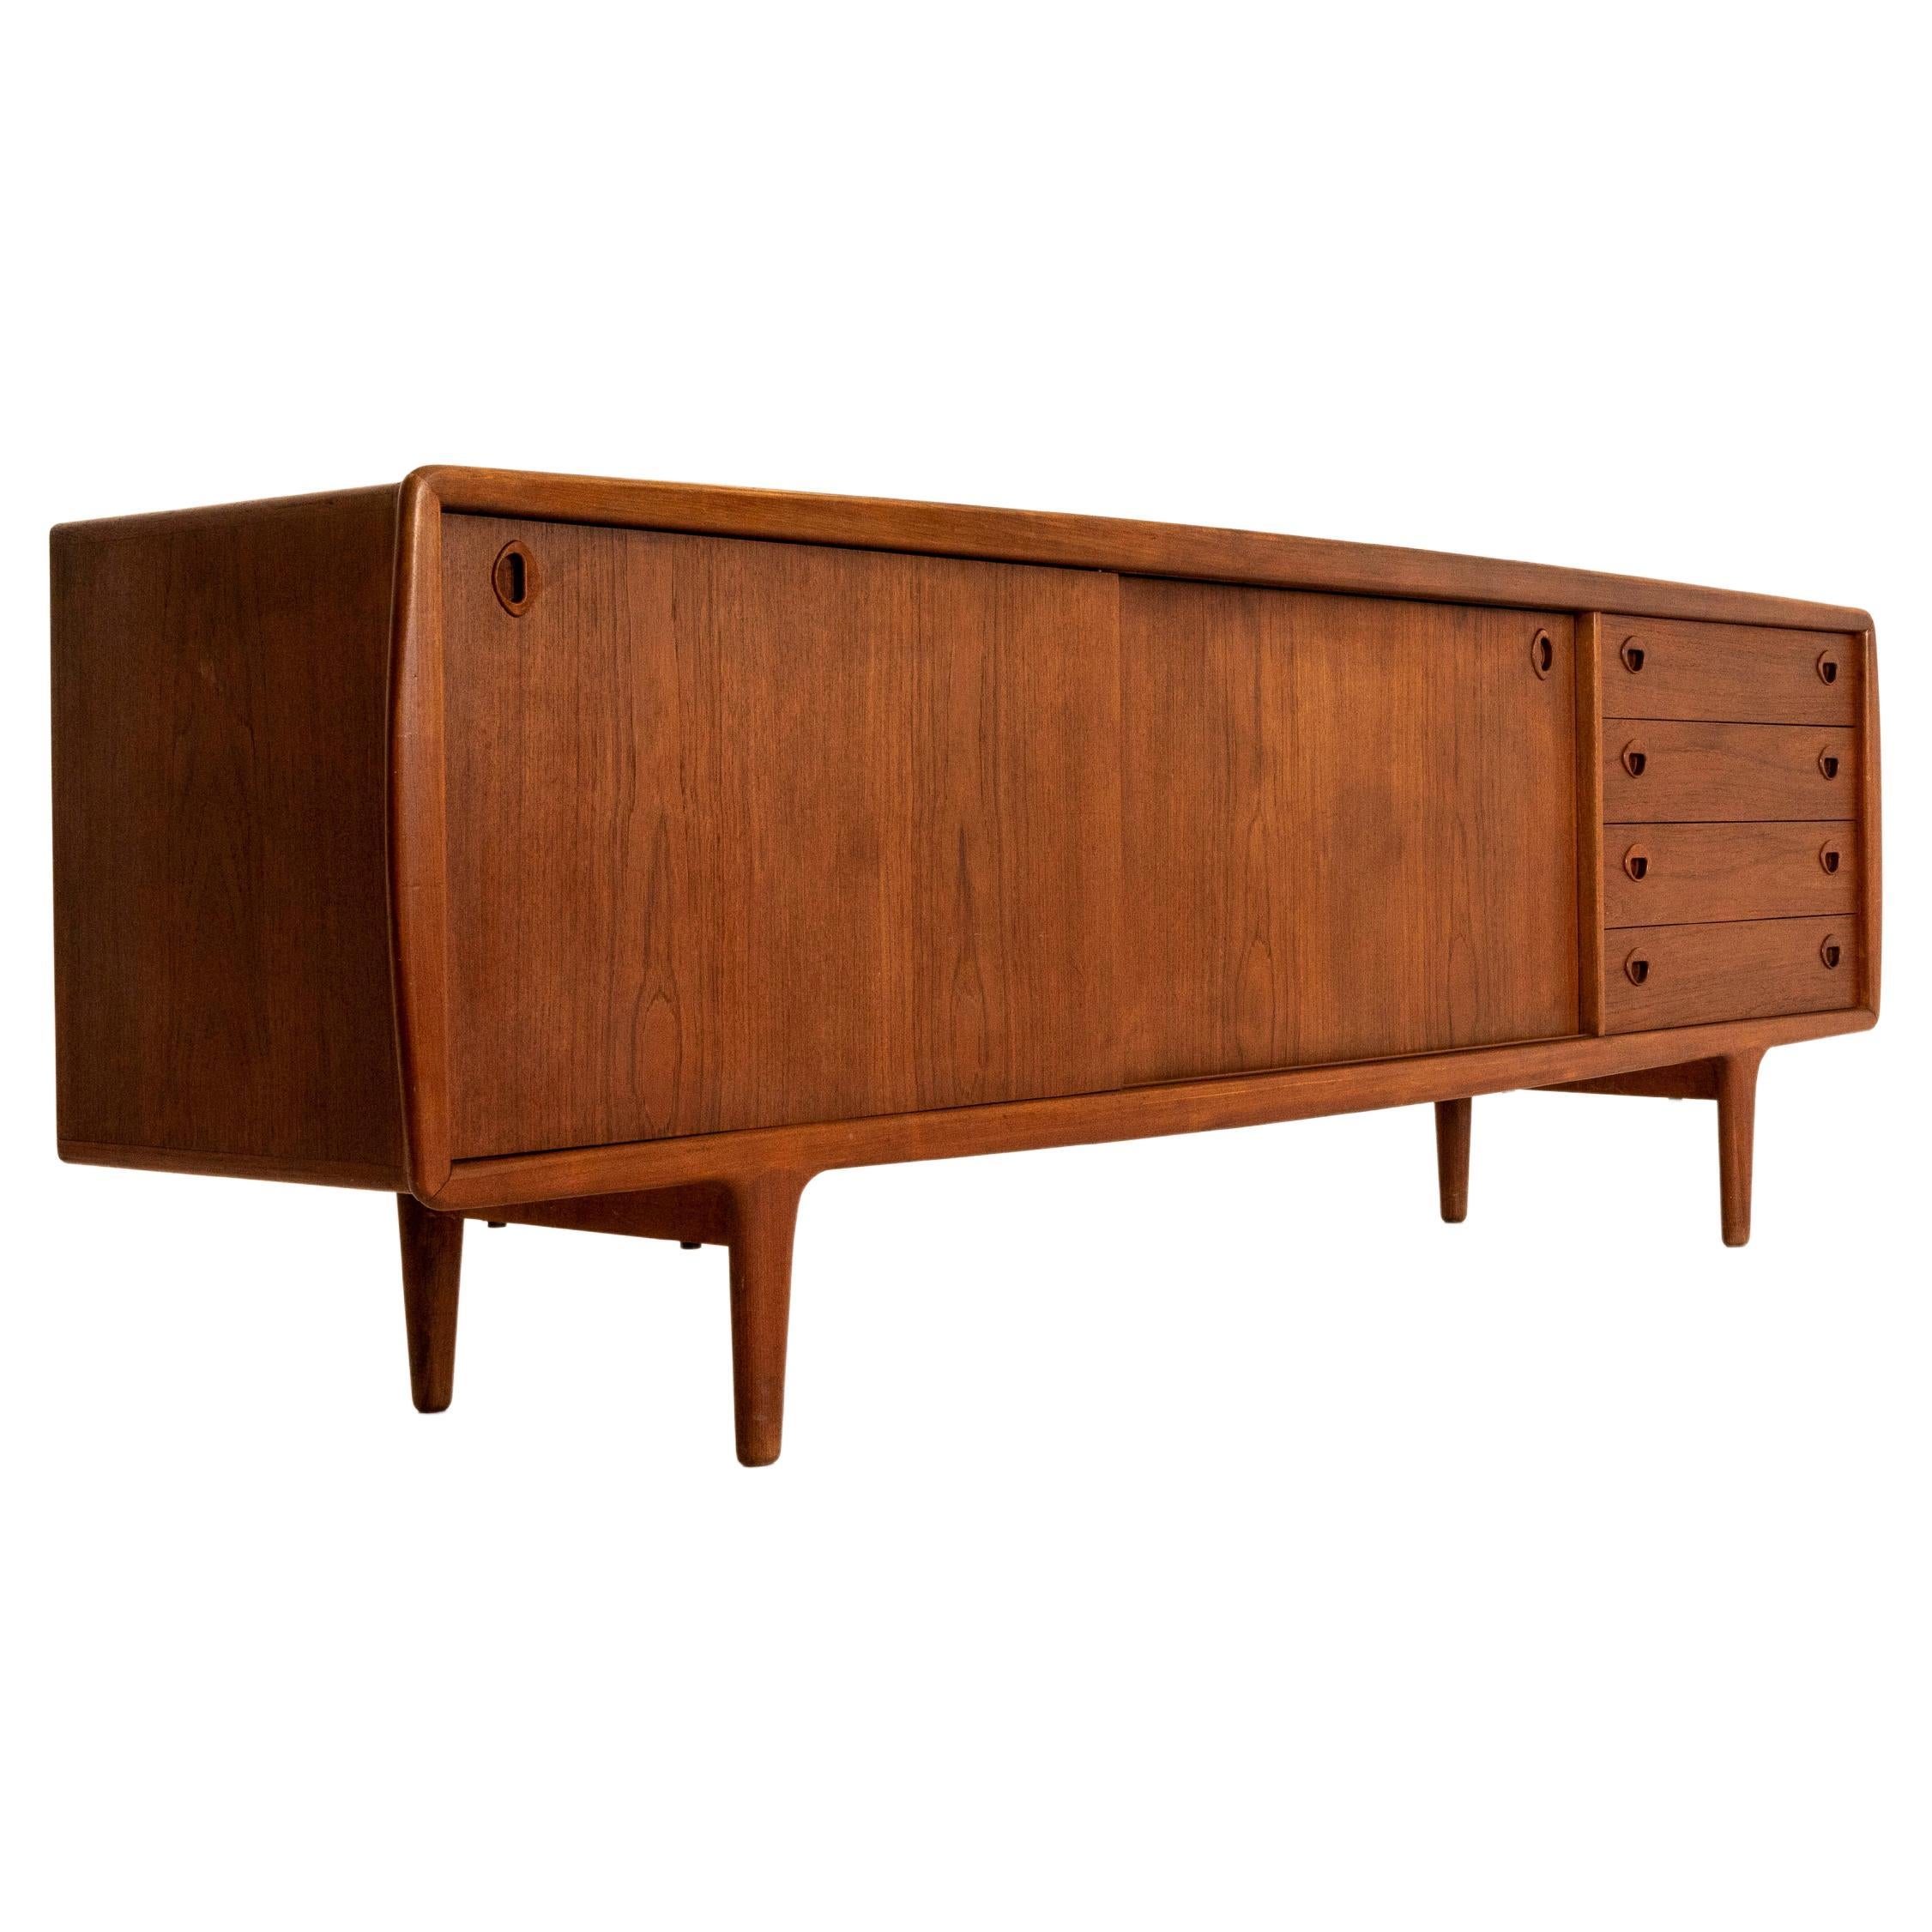 Large H.P. Hansen Sideboard in teak veneer for IMHA from Denmark 1960s. This sideboard has an impressive size and is very functional. It has two sliding doors and four drawers. It has the Danish vintage signature design by H.P. Hansen with round